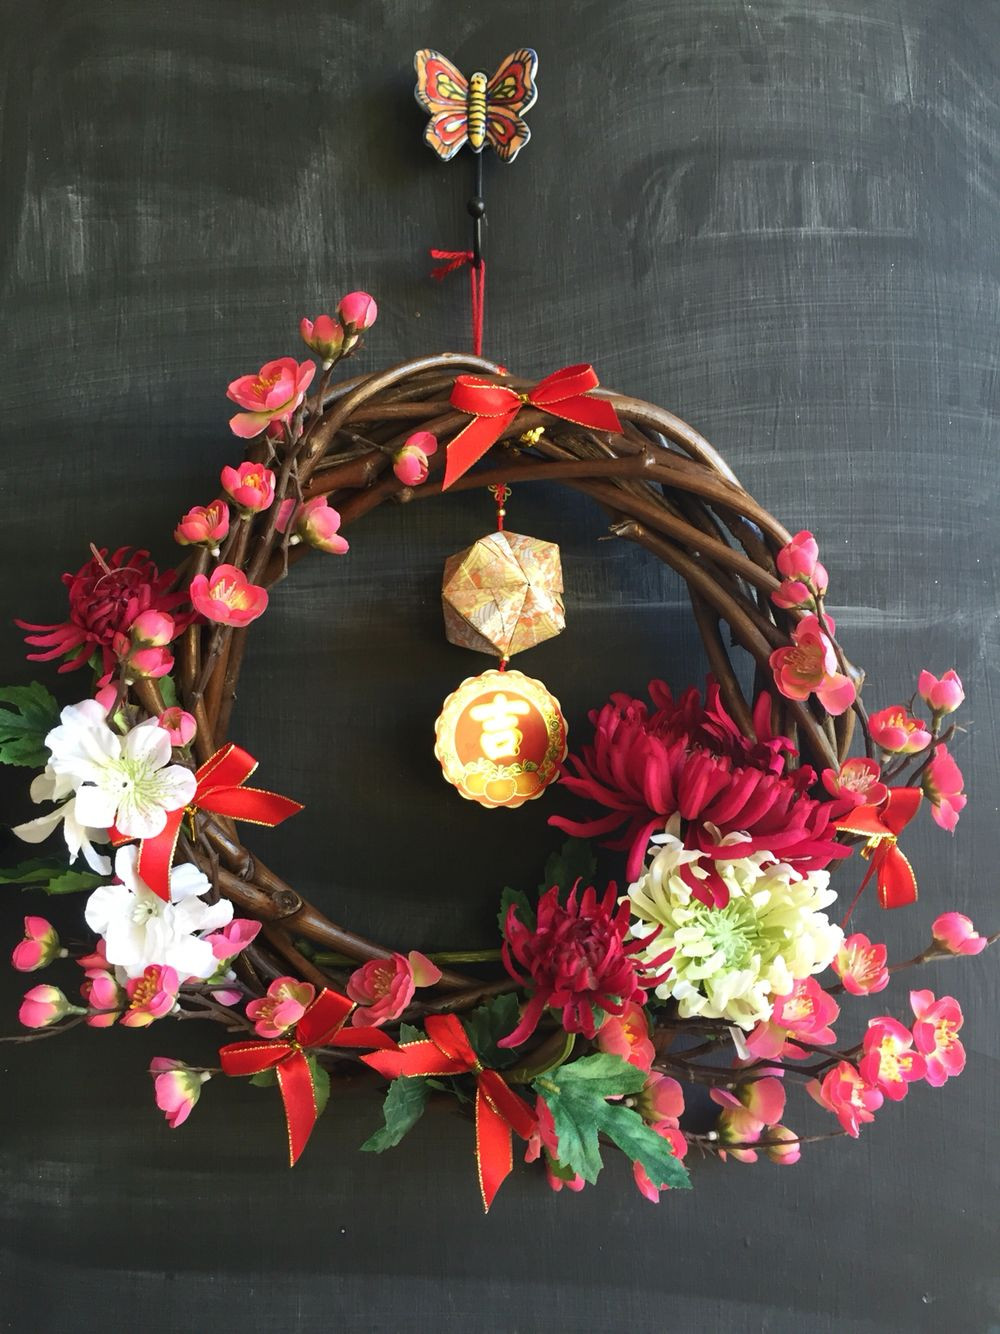 Chinese New Year Decor Ideas
 10 Chinese New Year decoration ideas that aren t tacky